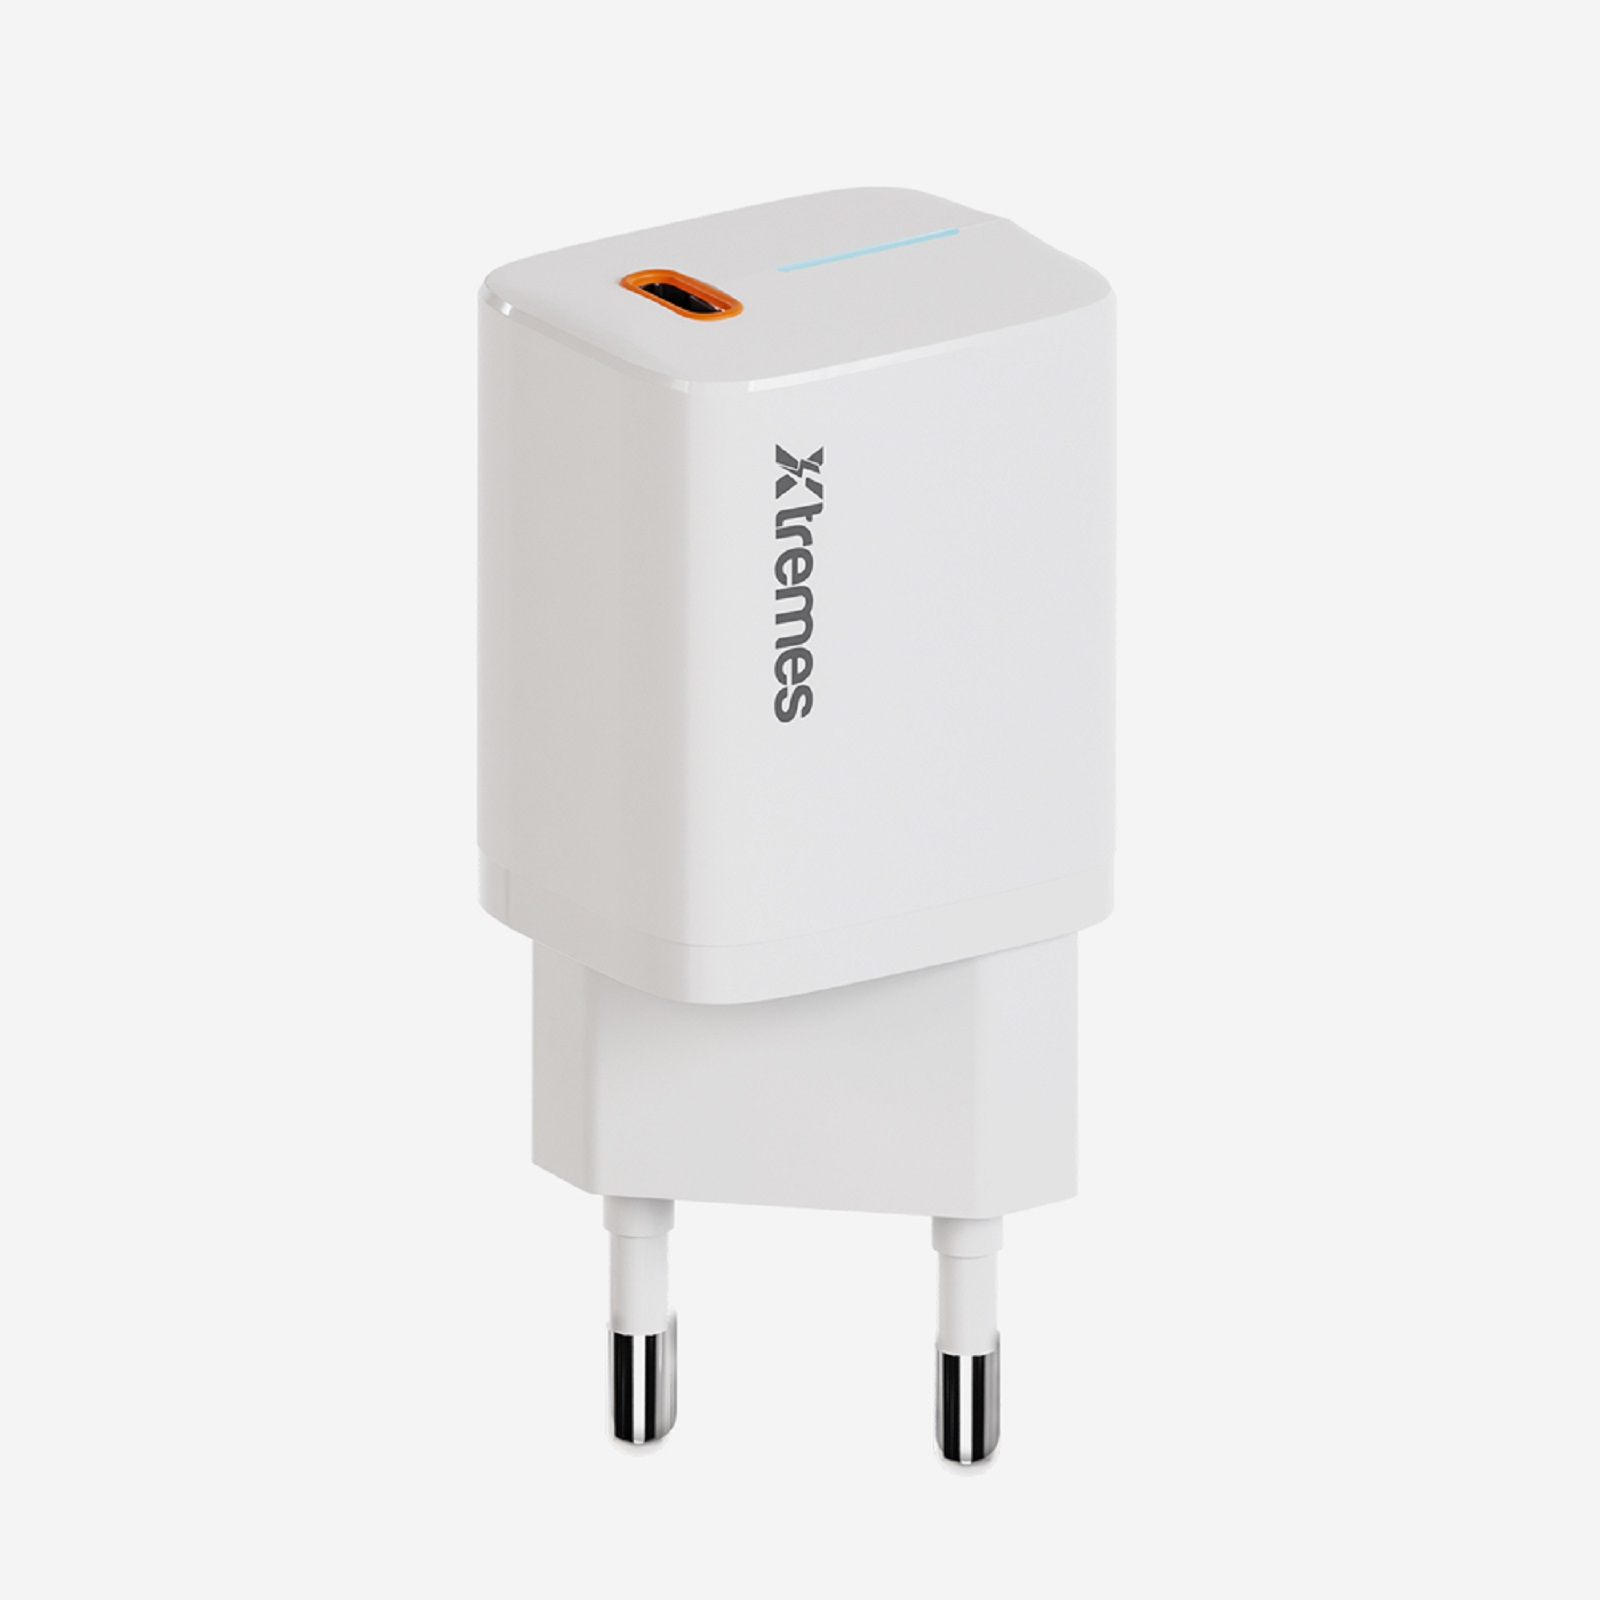 XTREMES Fast Charger (GC08) PD White Samsung, Xiaomi, Smartwatches, Redmi, Handys, Tablets, Ladegerät-Adapter 20W 3.0 Kabel) Apple, (ohne iPhone